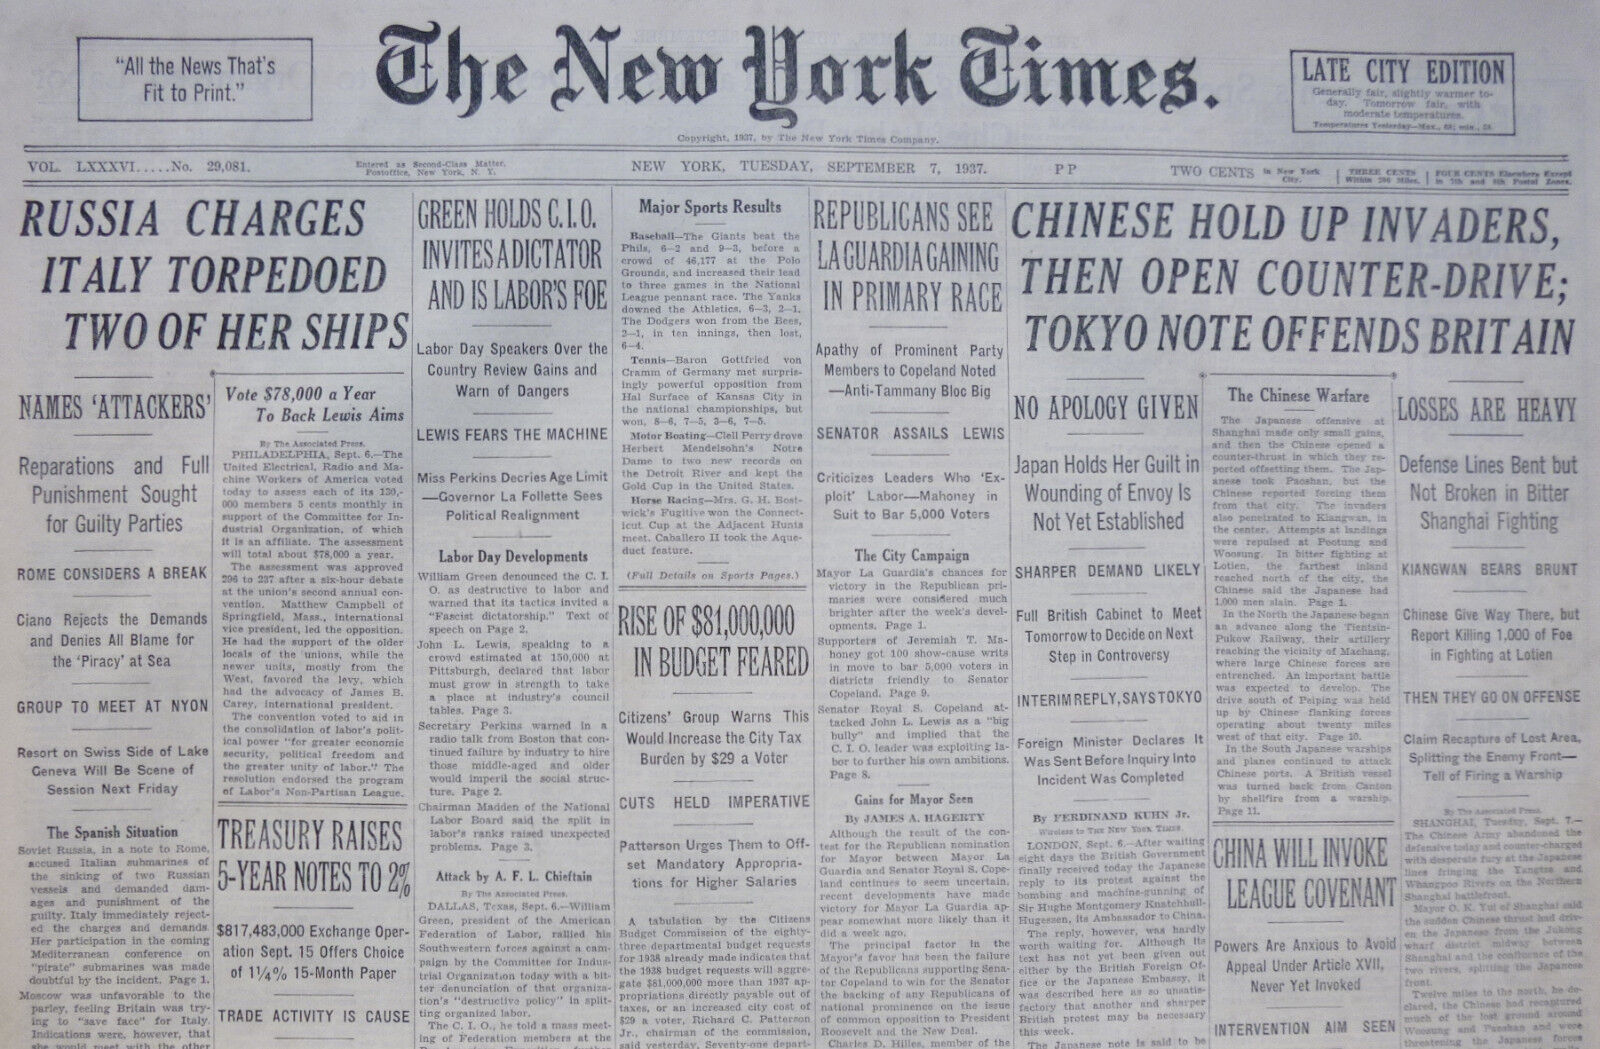 9-1937 September 7 CHINESE HOLD UP INVADERS OPEN COUNTER DRIVE, TOKYO OFFENDS UK